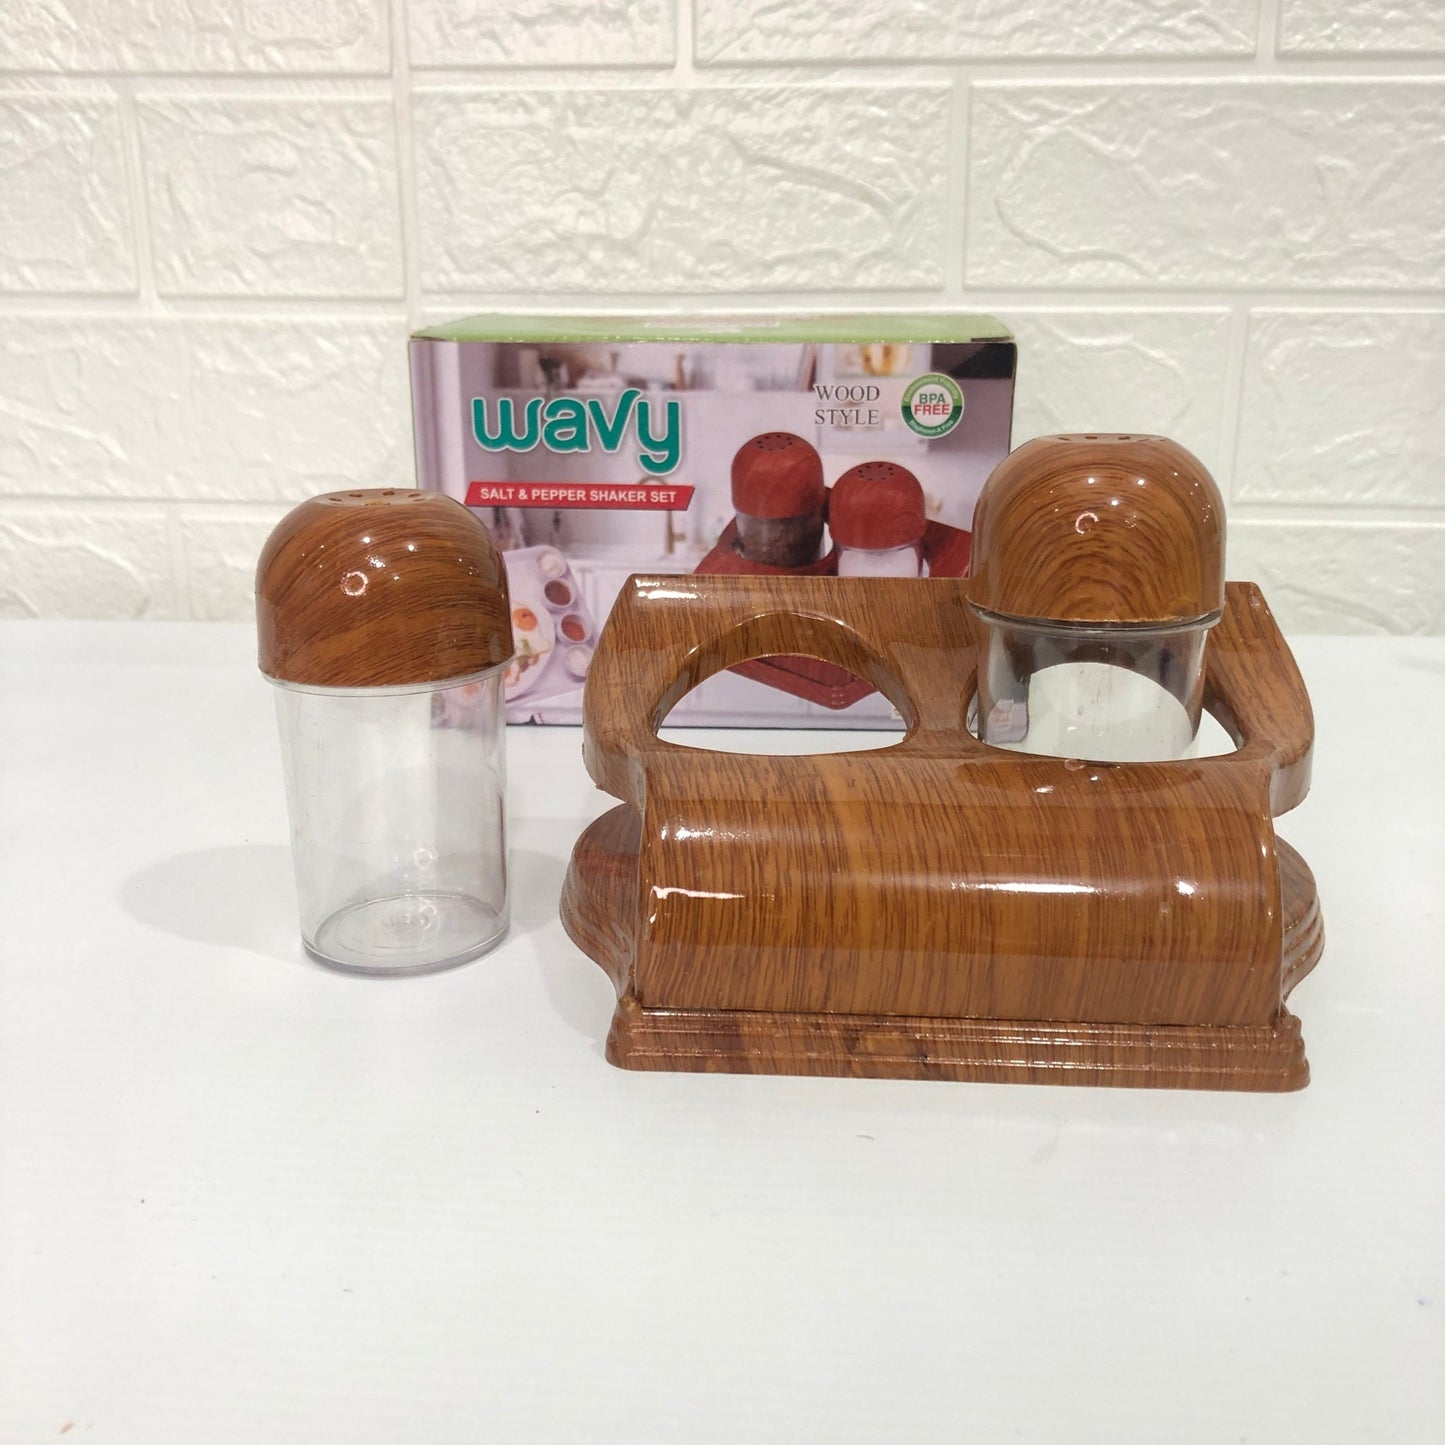 Wavy Salt and Paper Shaker Set - DS Traders